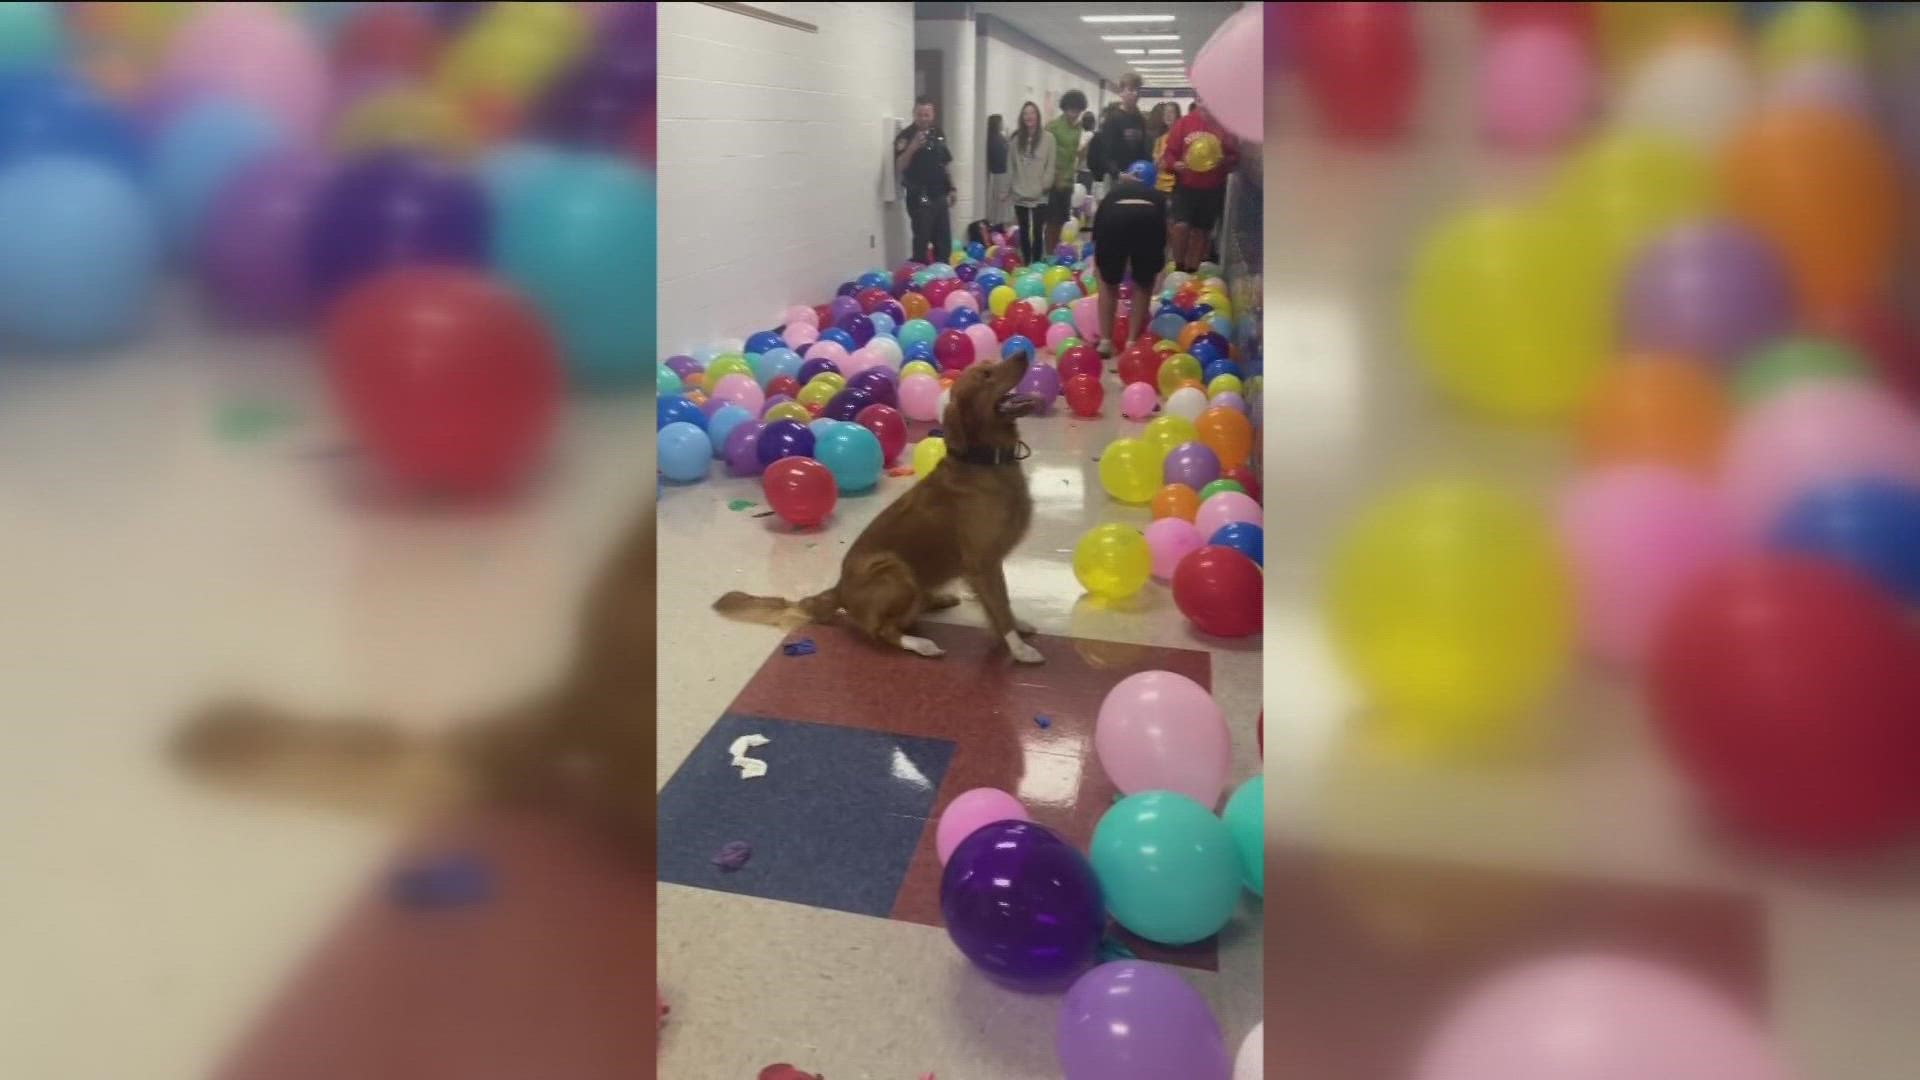 Students at Wayne Trace High School filled the hallways with balloons Wednesday as a lighthearted send off before graduation.